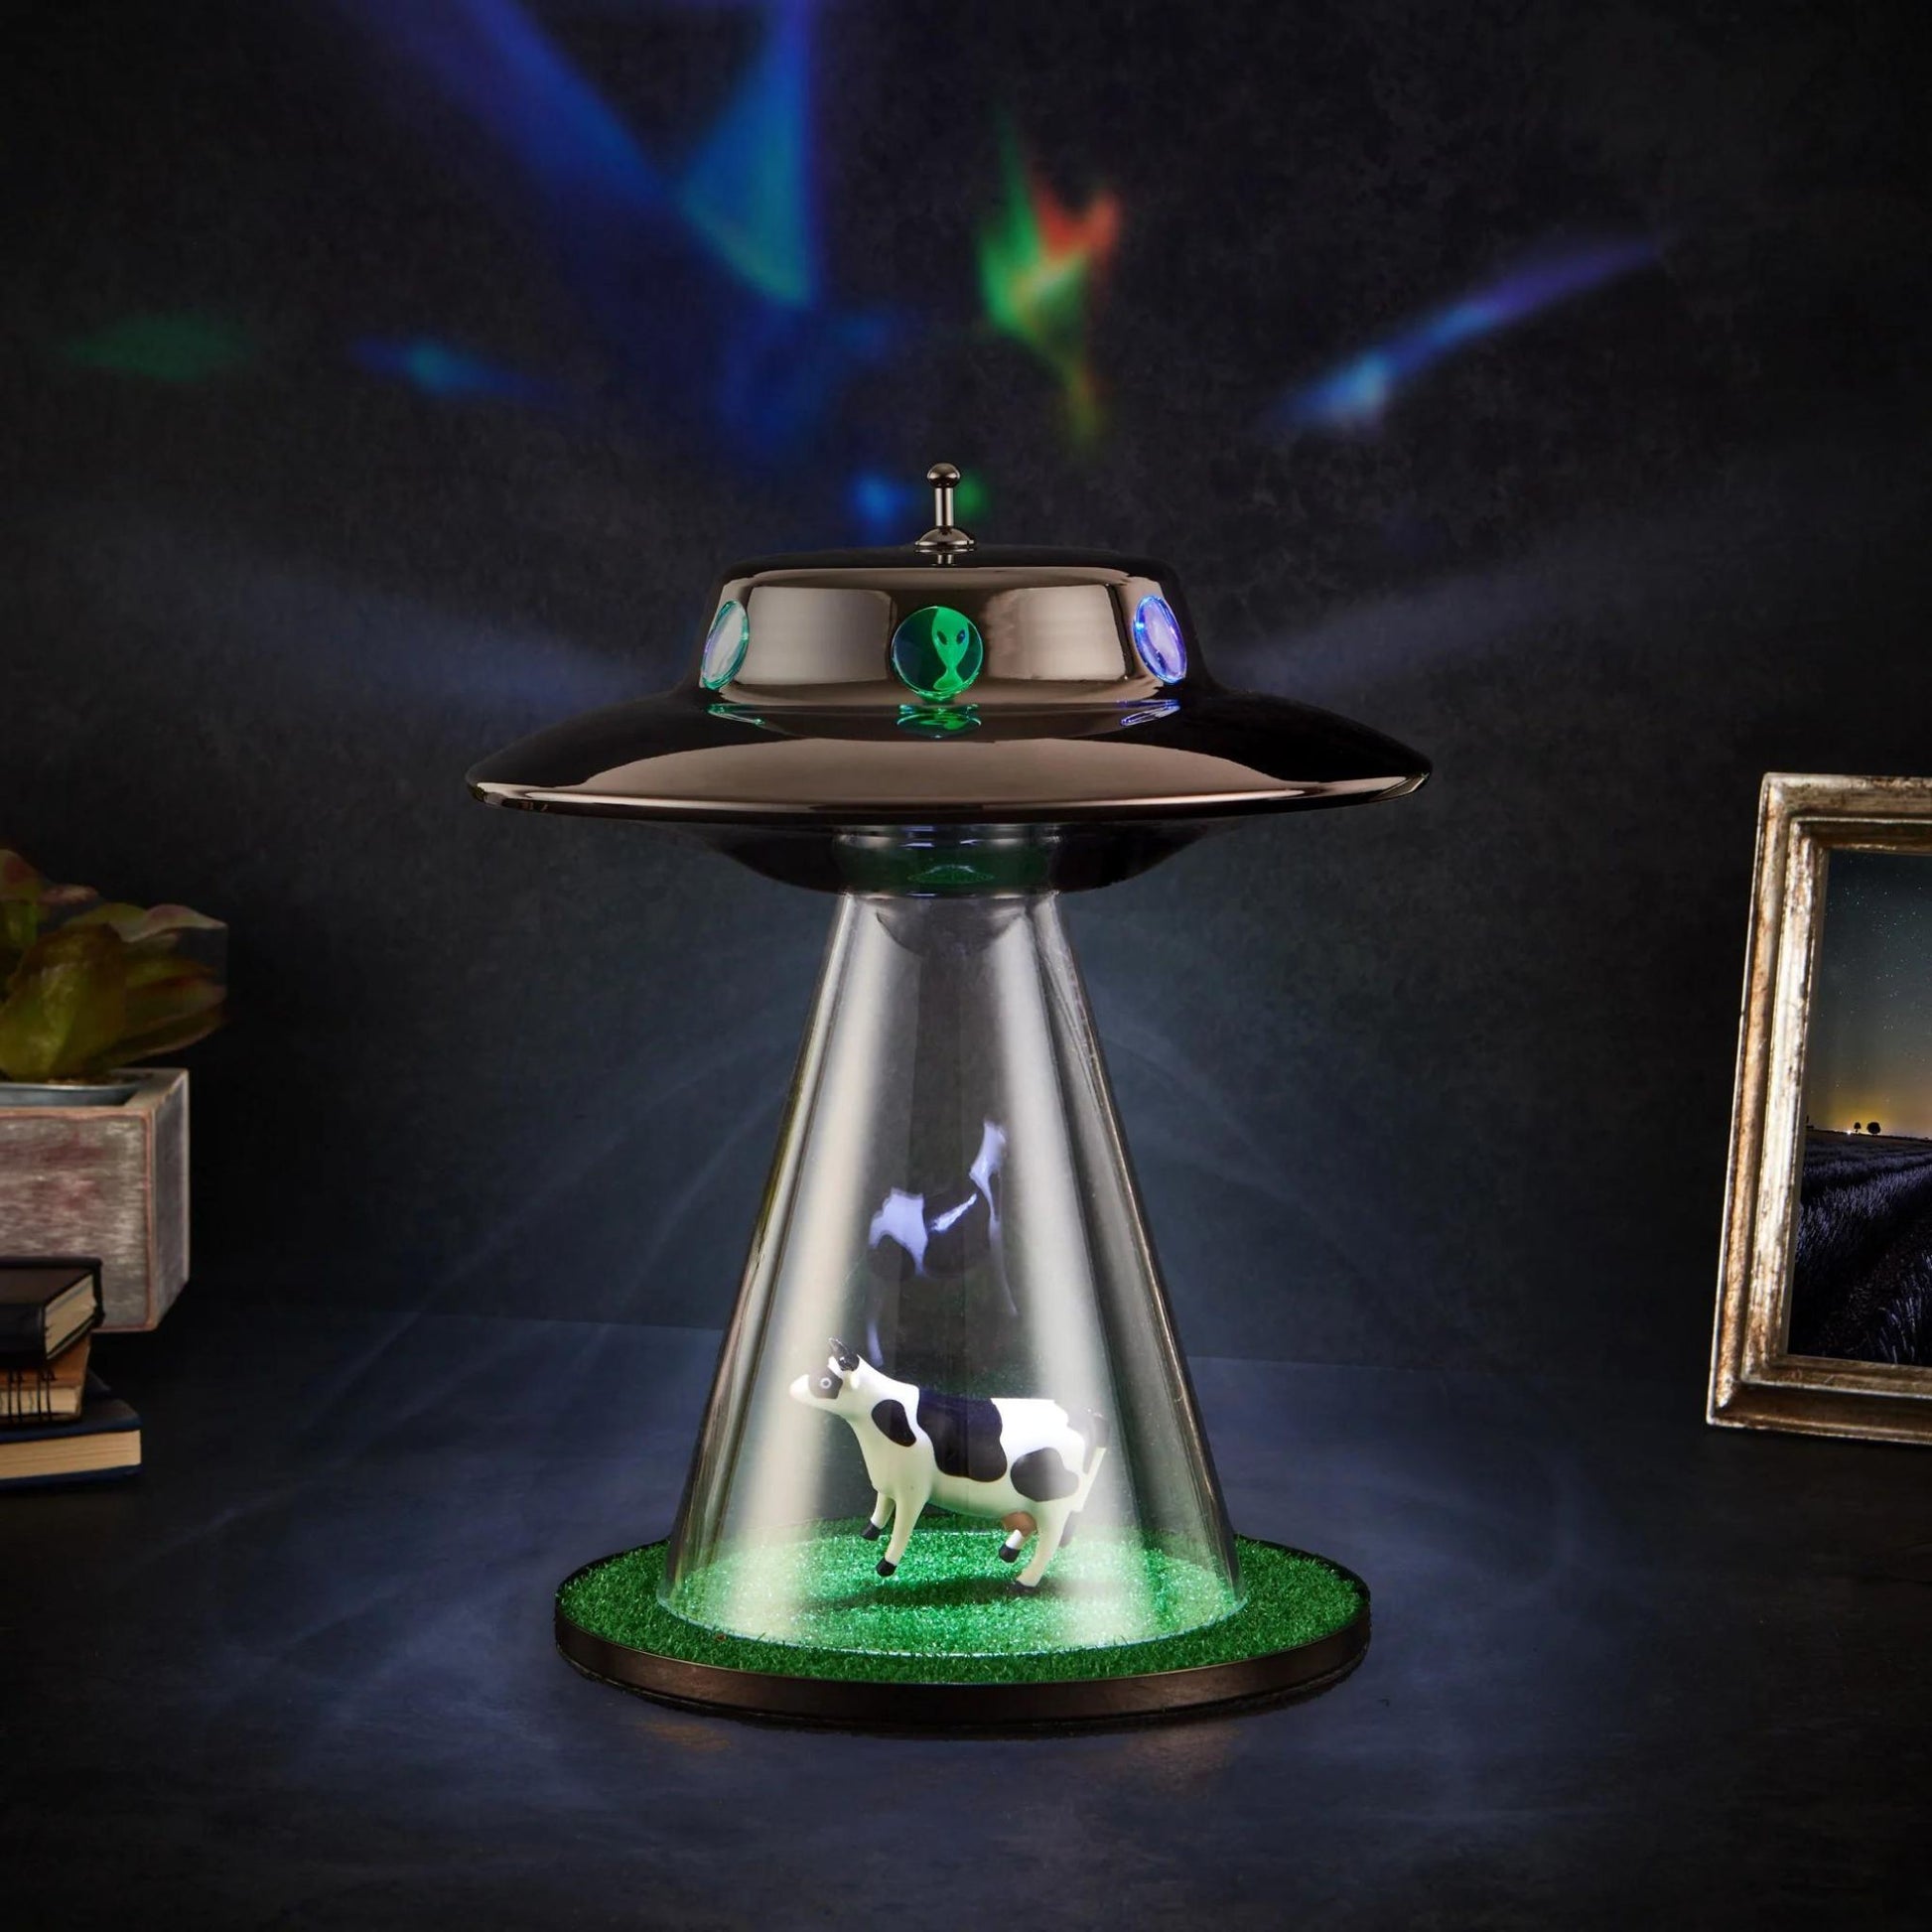 table display - Original UFO Cow Lamp & amazon alien abduction table desk lamp with grass, cow and flying UFO saucer LED RGB night light